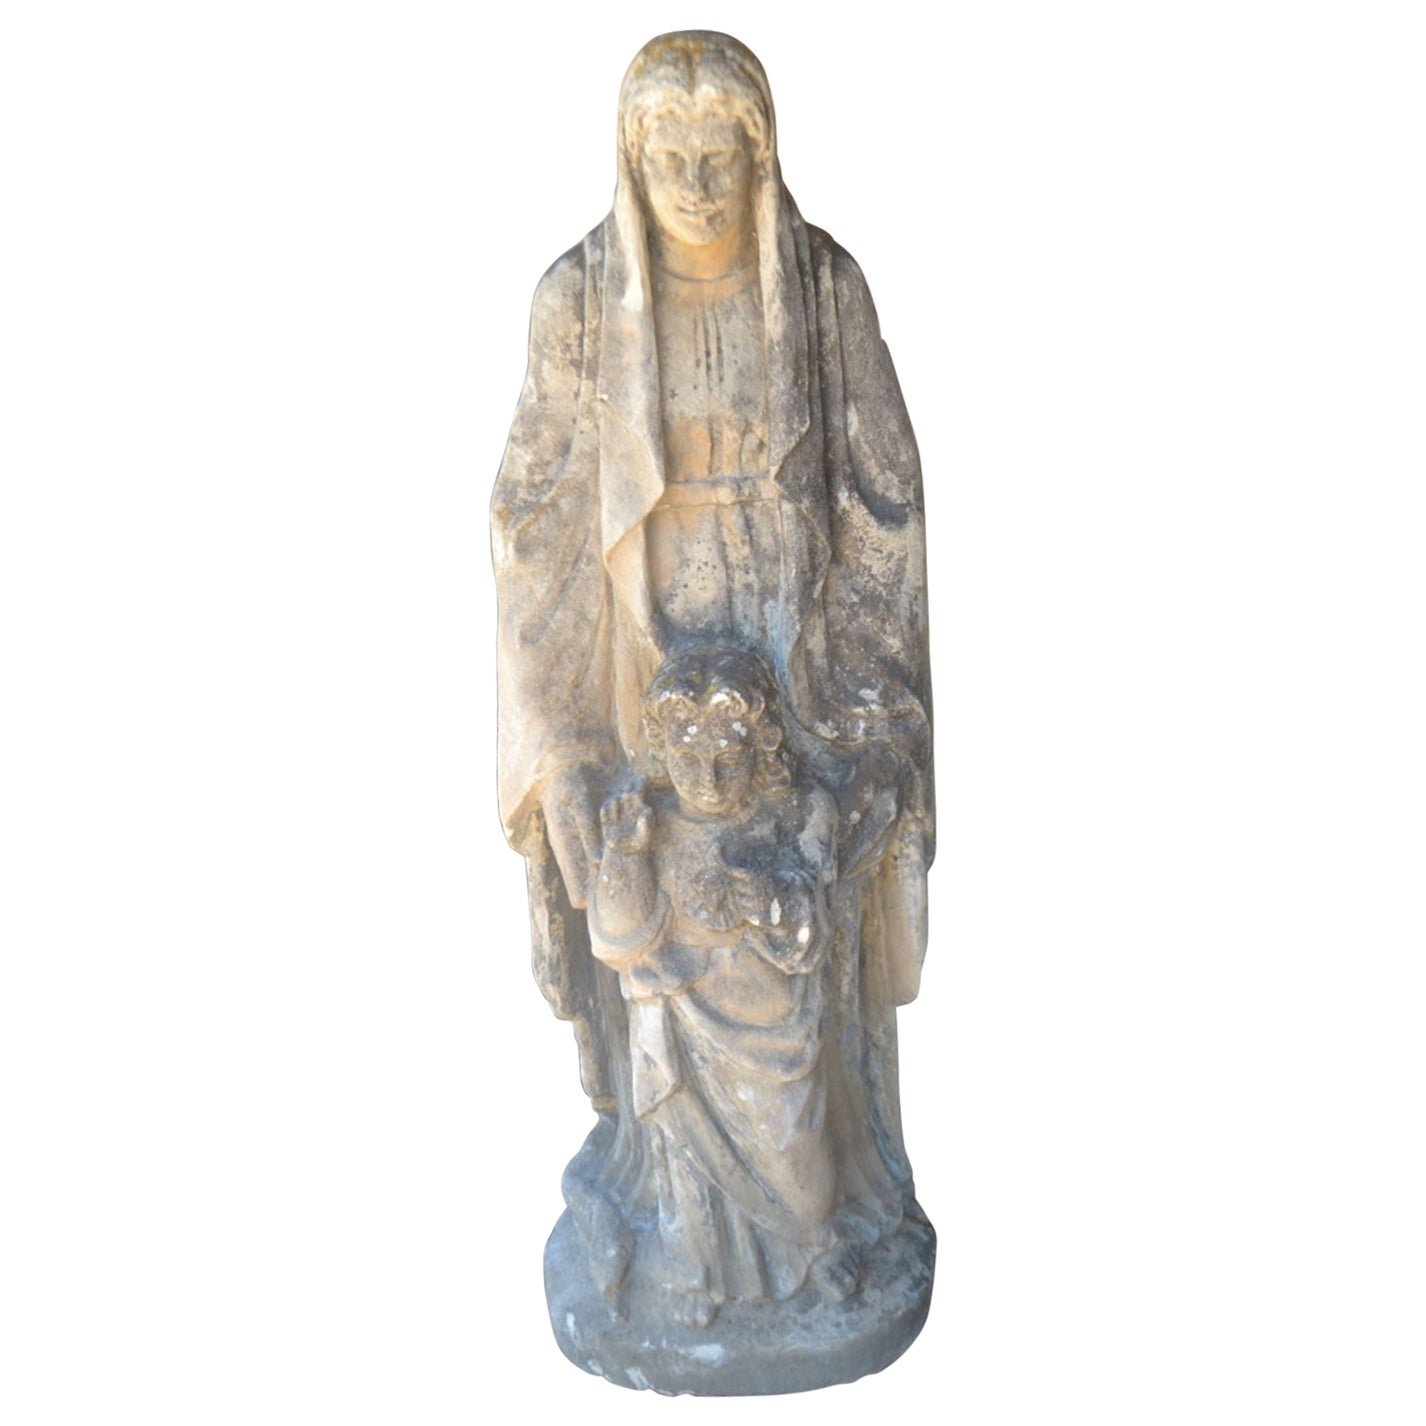 Carved Stone Statue of Saint Anne and Child Mary